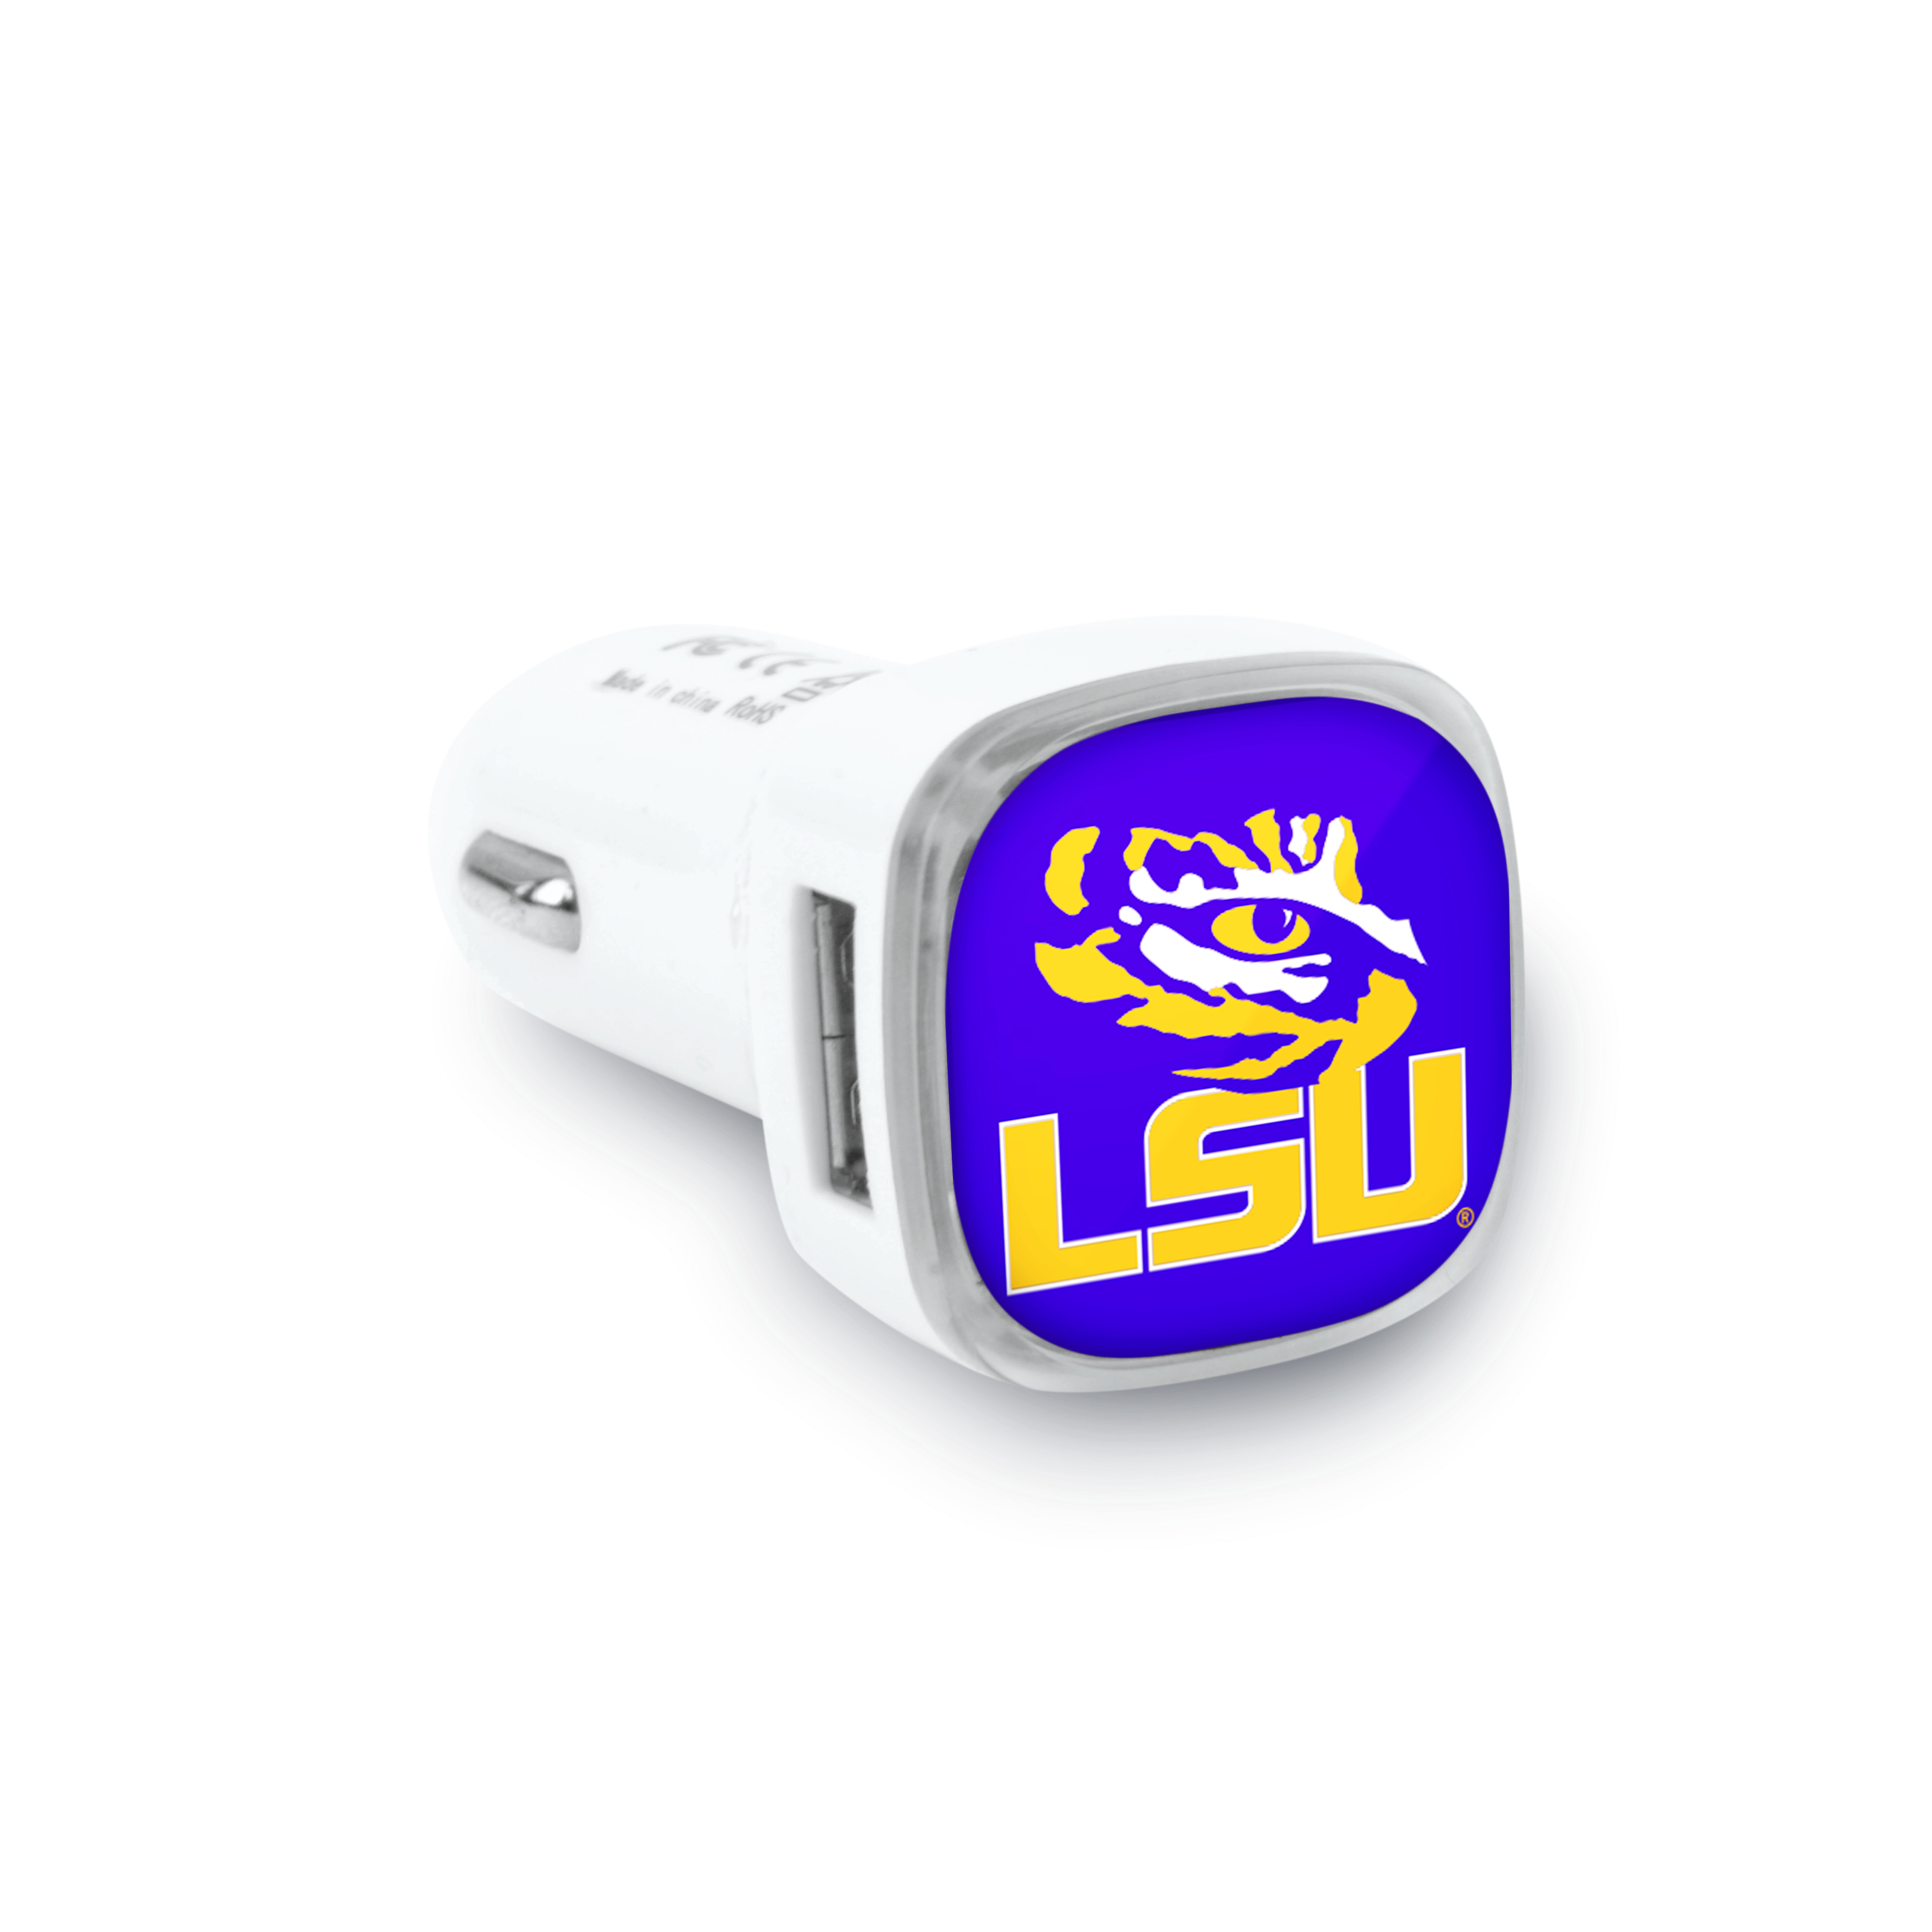 LSU Tigers Car Charger